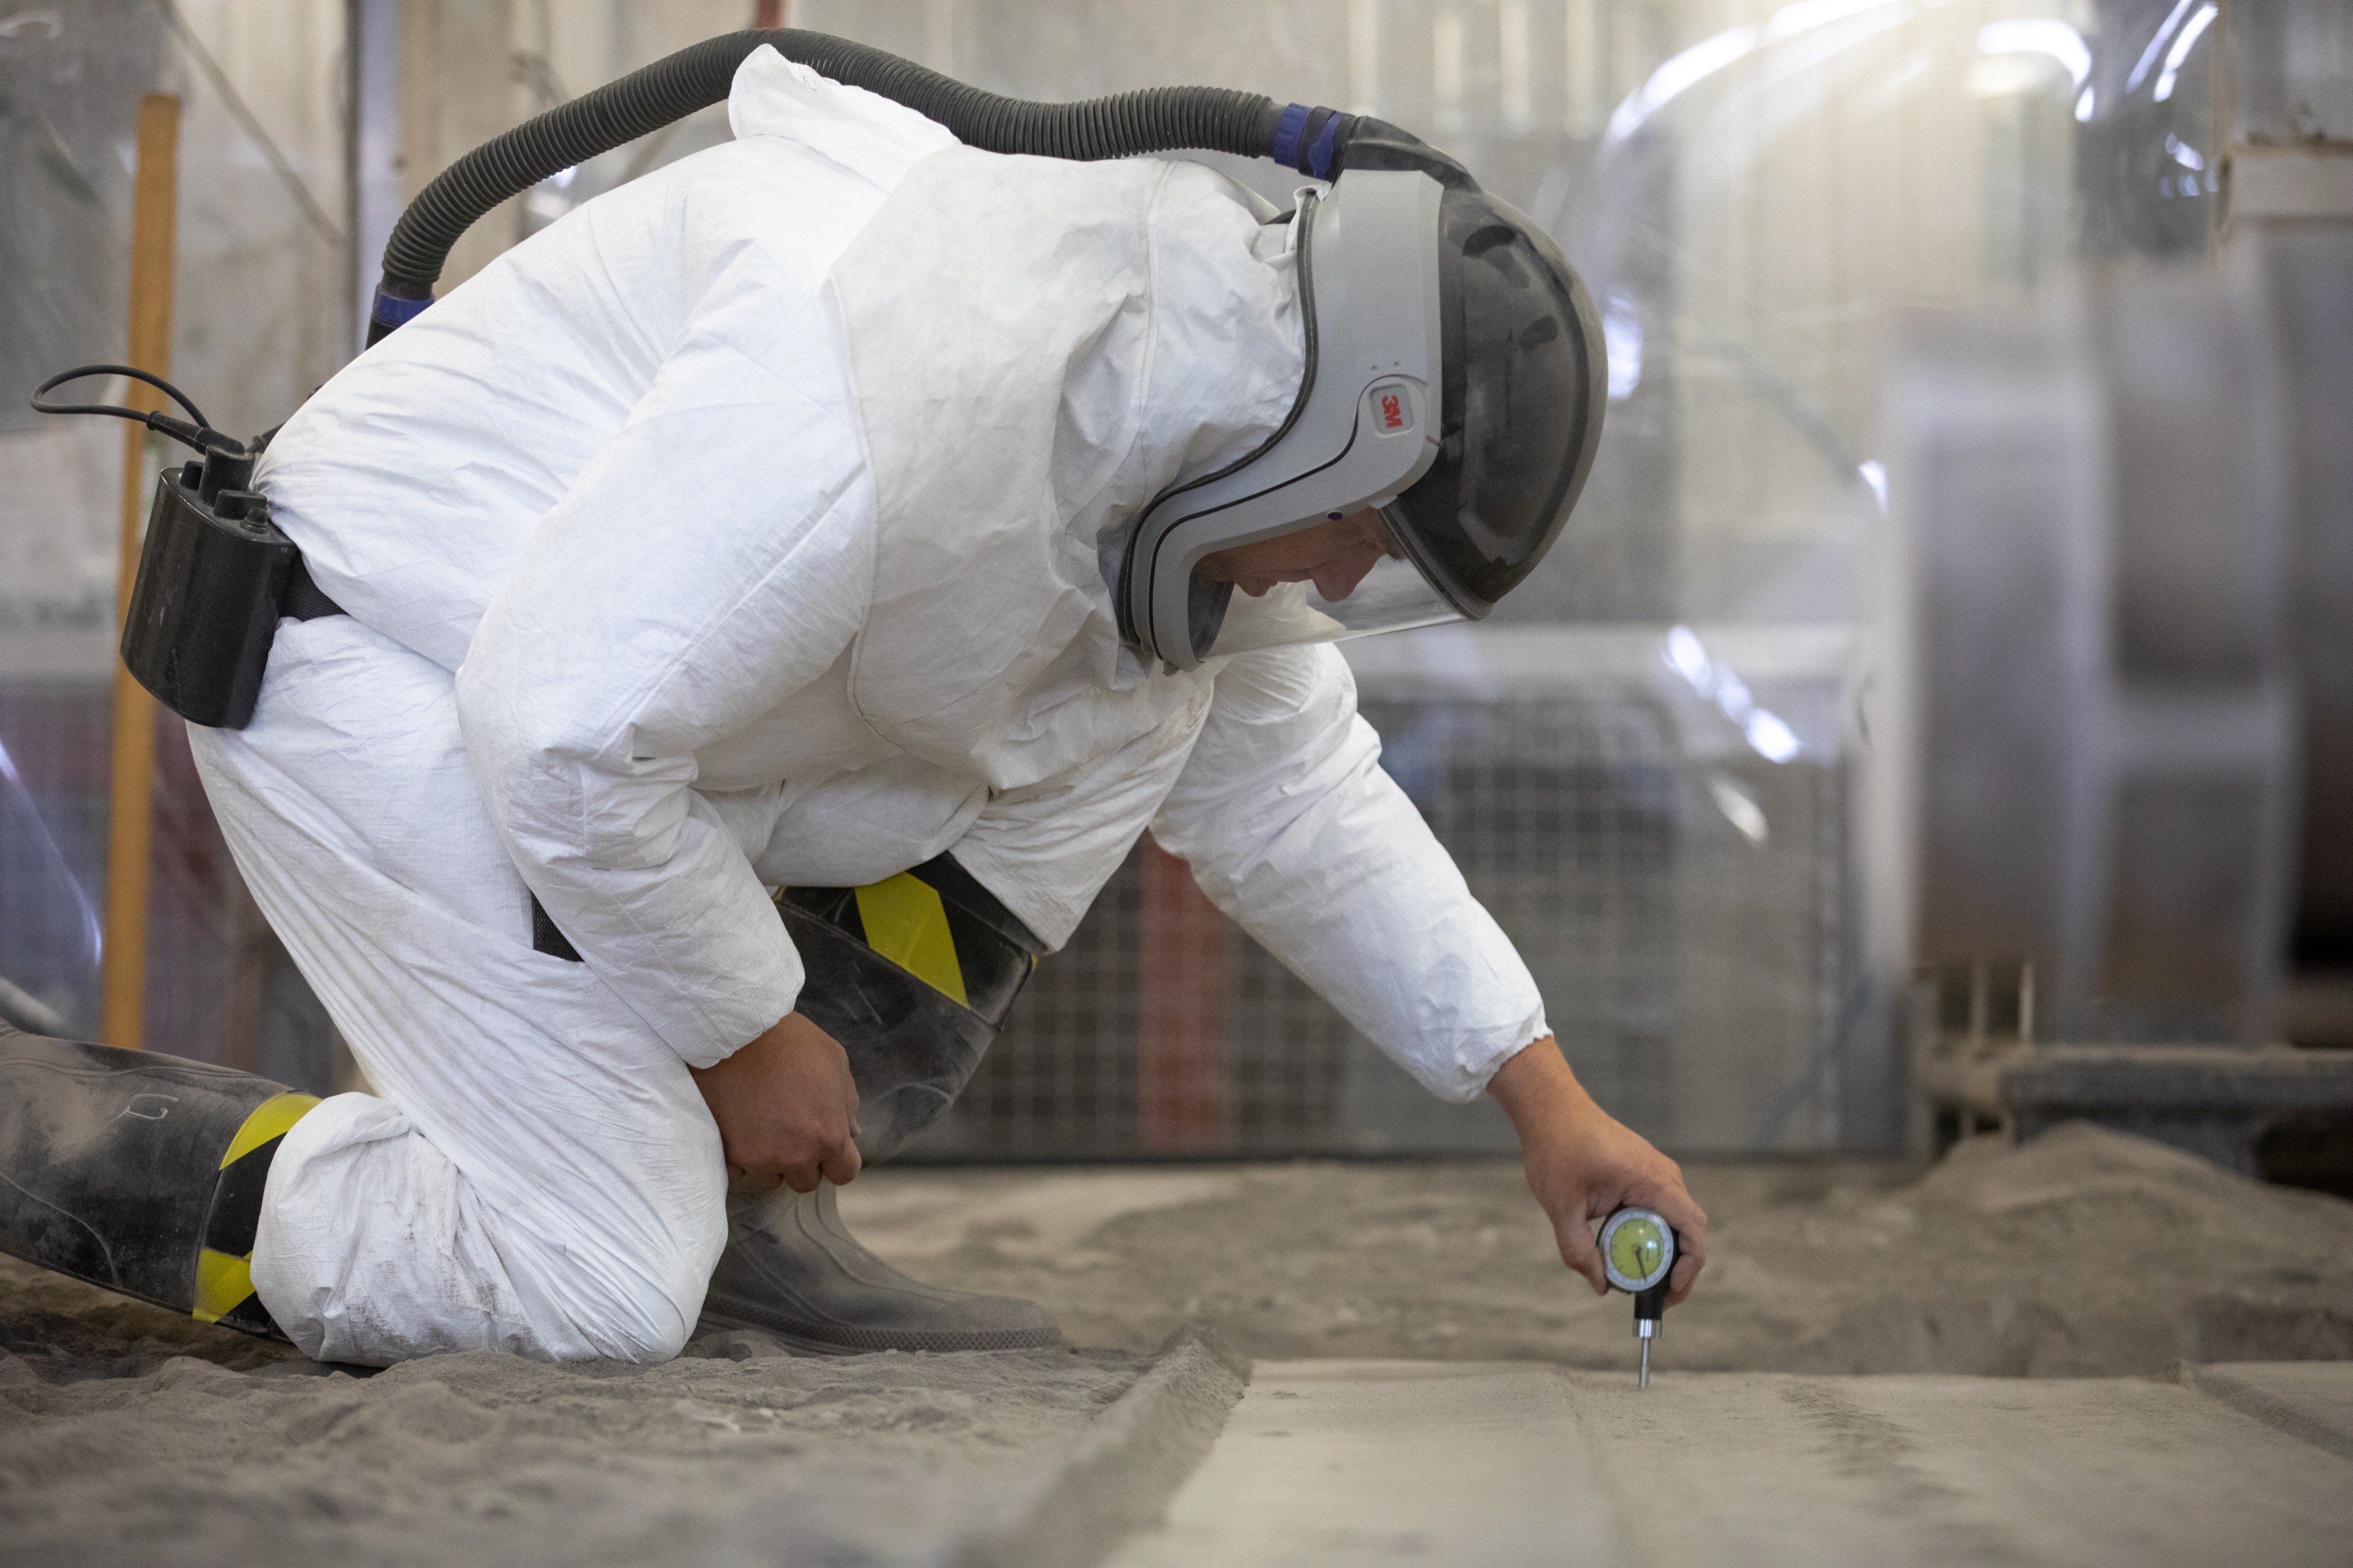 A scientist in a safety suit kneels on a bed of simulation regolith and takes measurements from the soil using an instrument that pierces the surface.